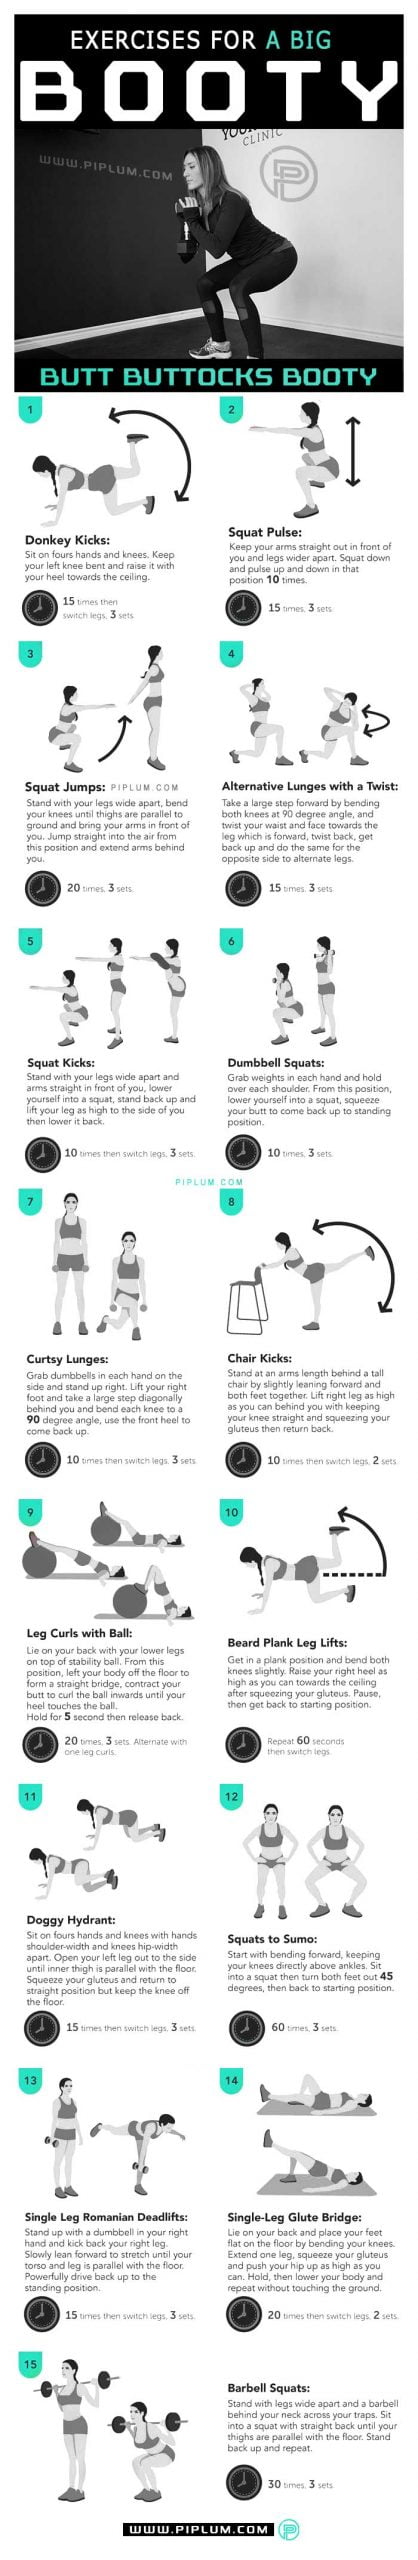 Exercises-For-A-Big-Booty-Shape-Your-Body-With-These-Butt-Exercises-For-Women-routine-poster